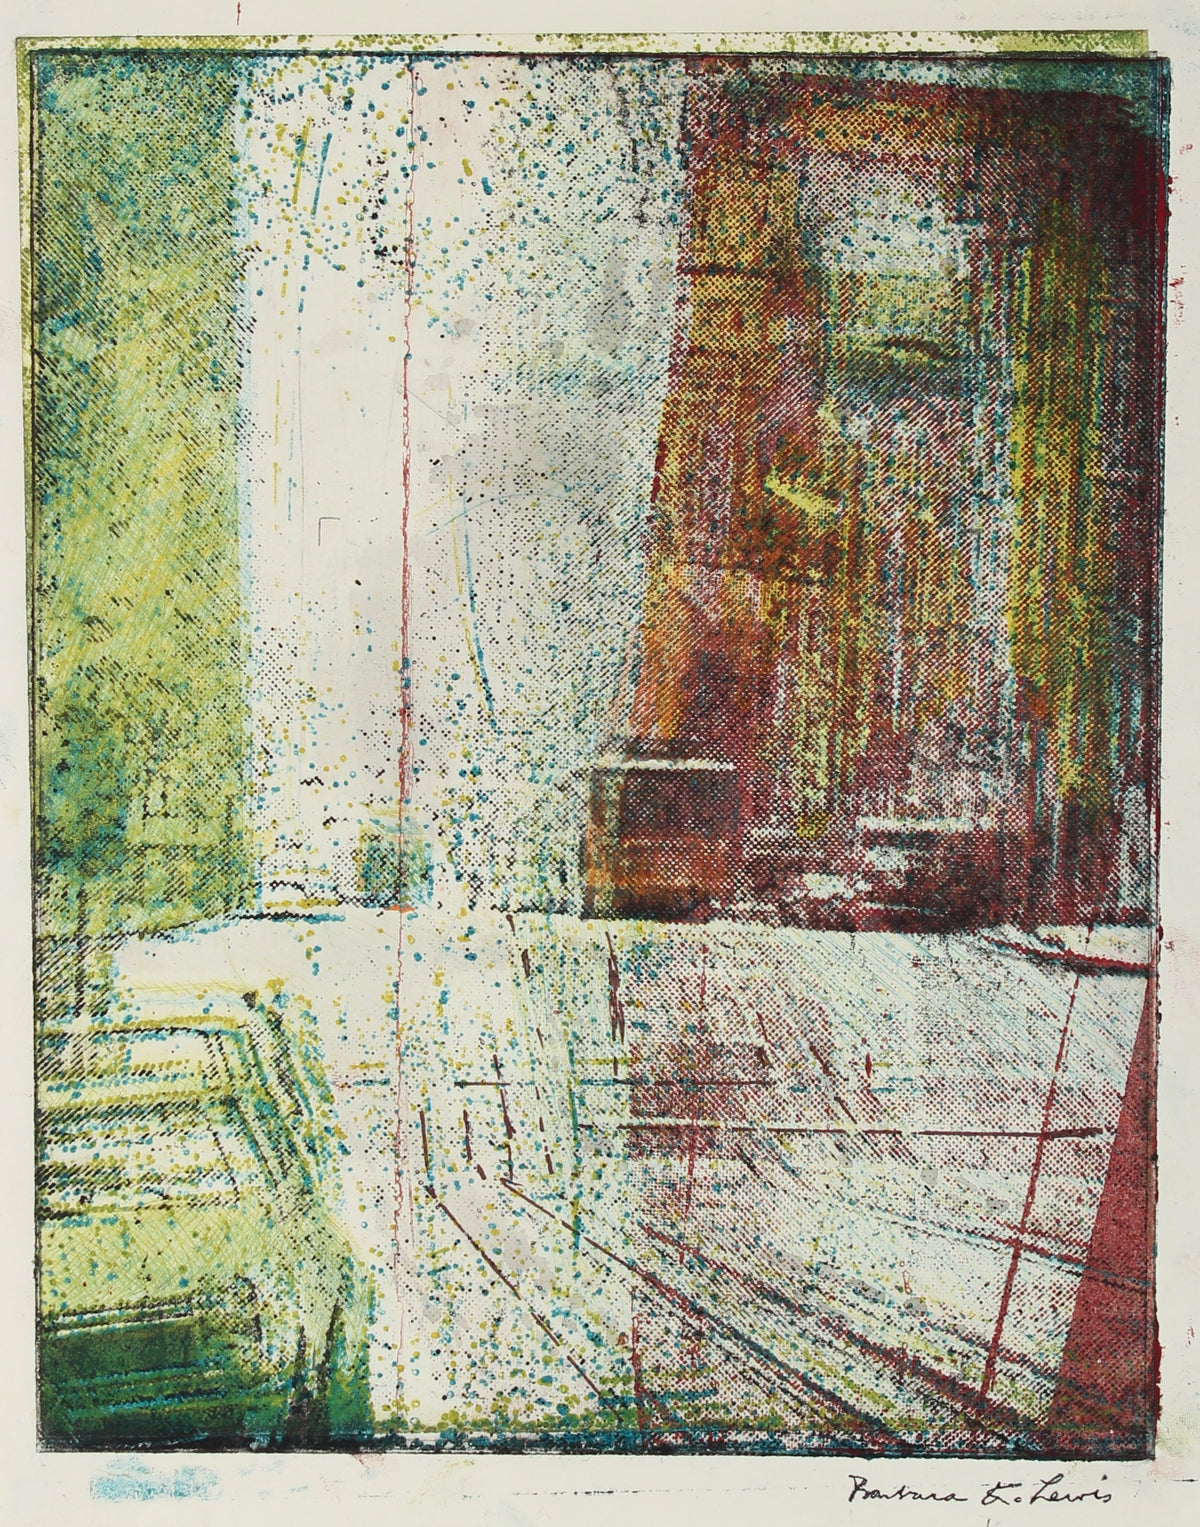 Abstracted View of a Cable Car&lt;br&gt;1970s Serigraph&lt;br&gt;&lt;br&gt;#A1471